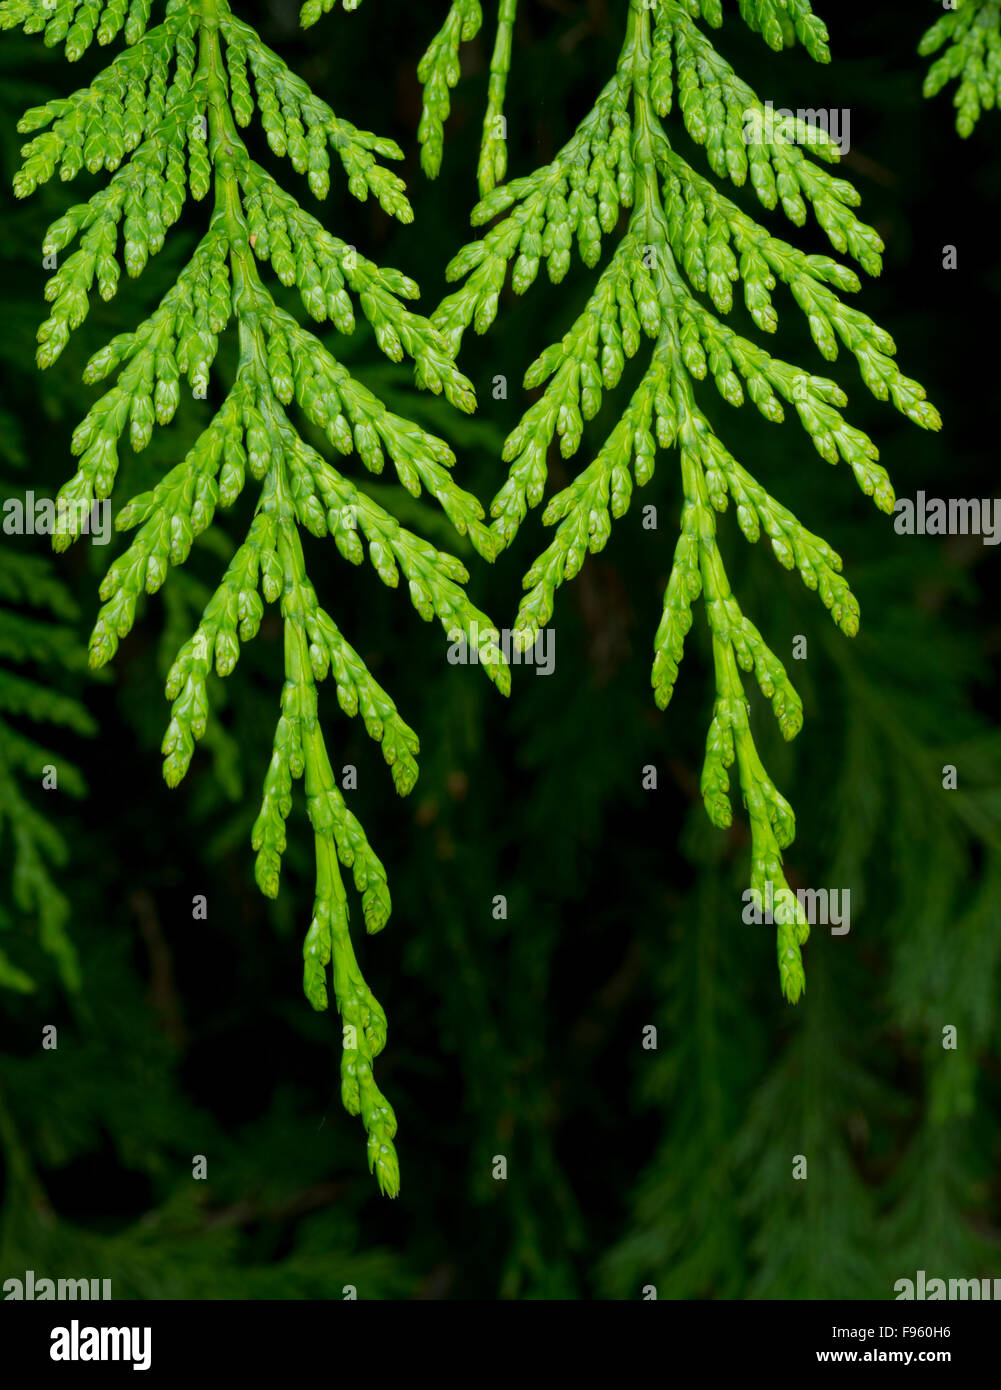 Thuja plicata, commonly called western or Pacific red cedar, British Columbia, Canada Stock Photo